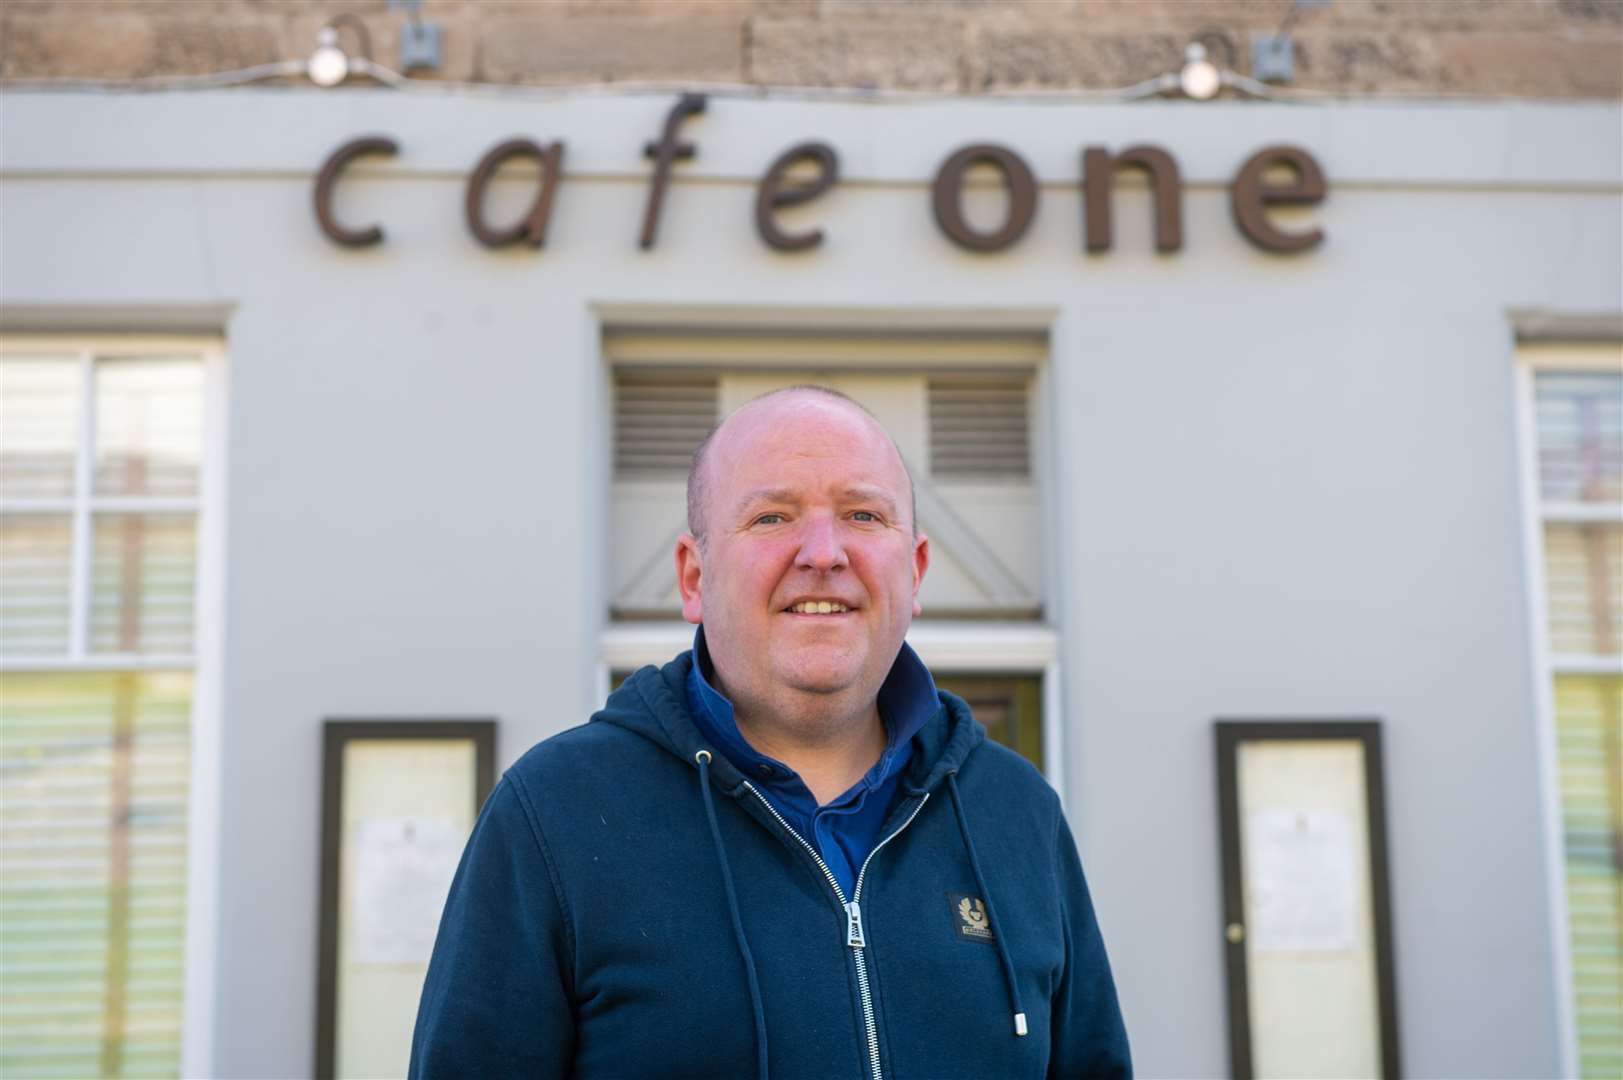 Norman MacDonald, of Cafe One.